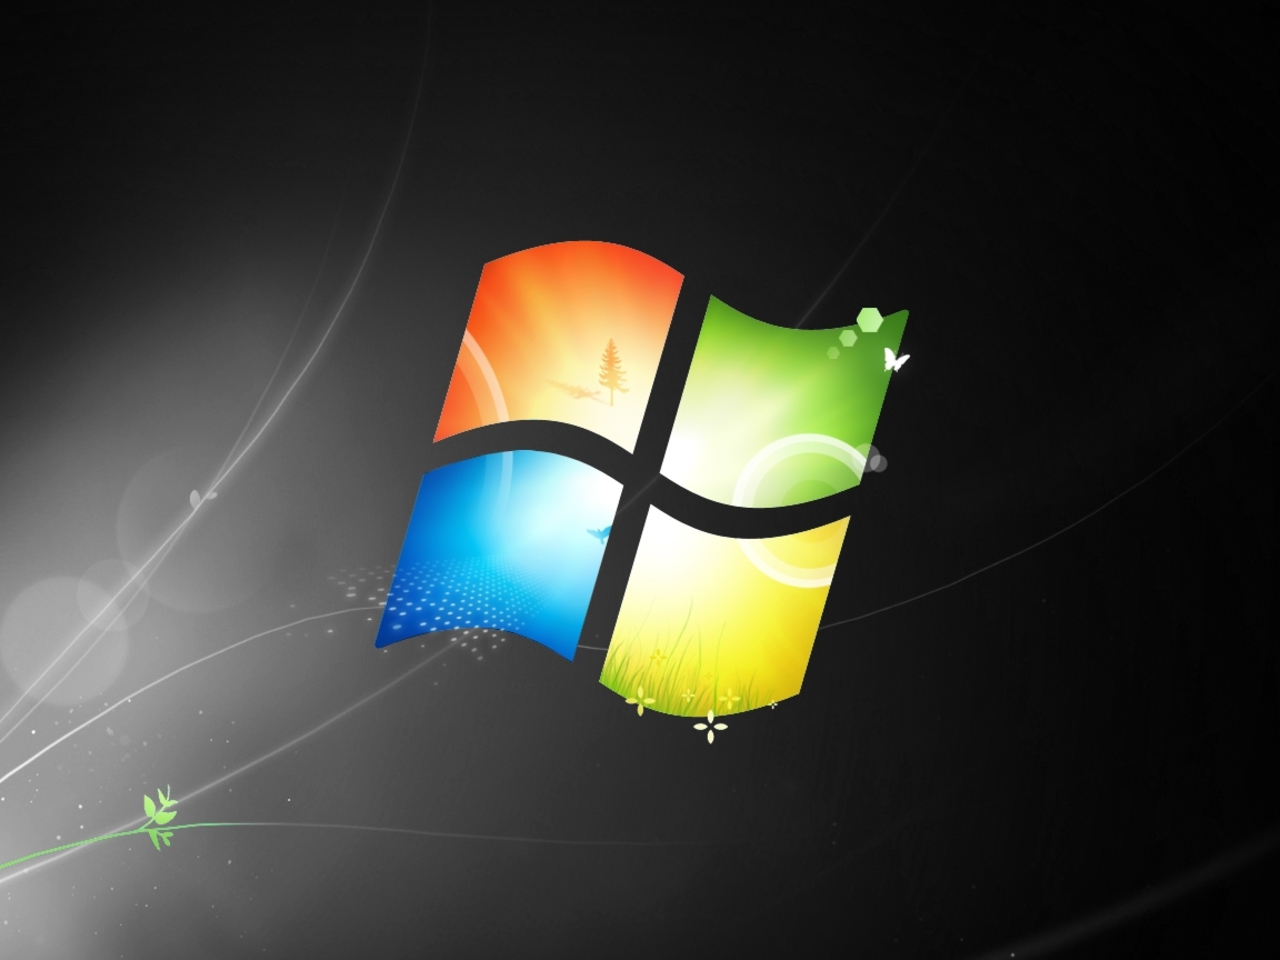 windows 8.1 wallpaper themes,light,graphics,graphic design,animation,operating system